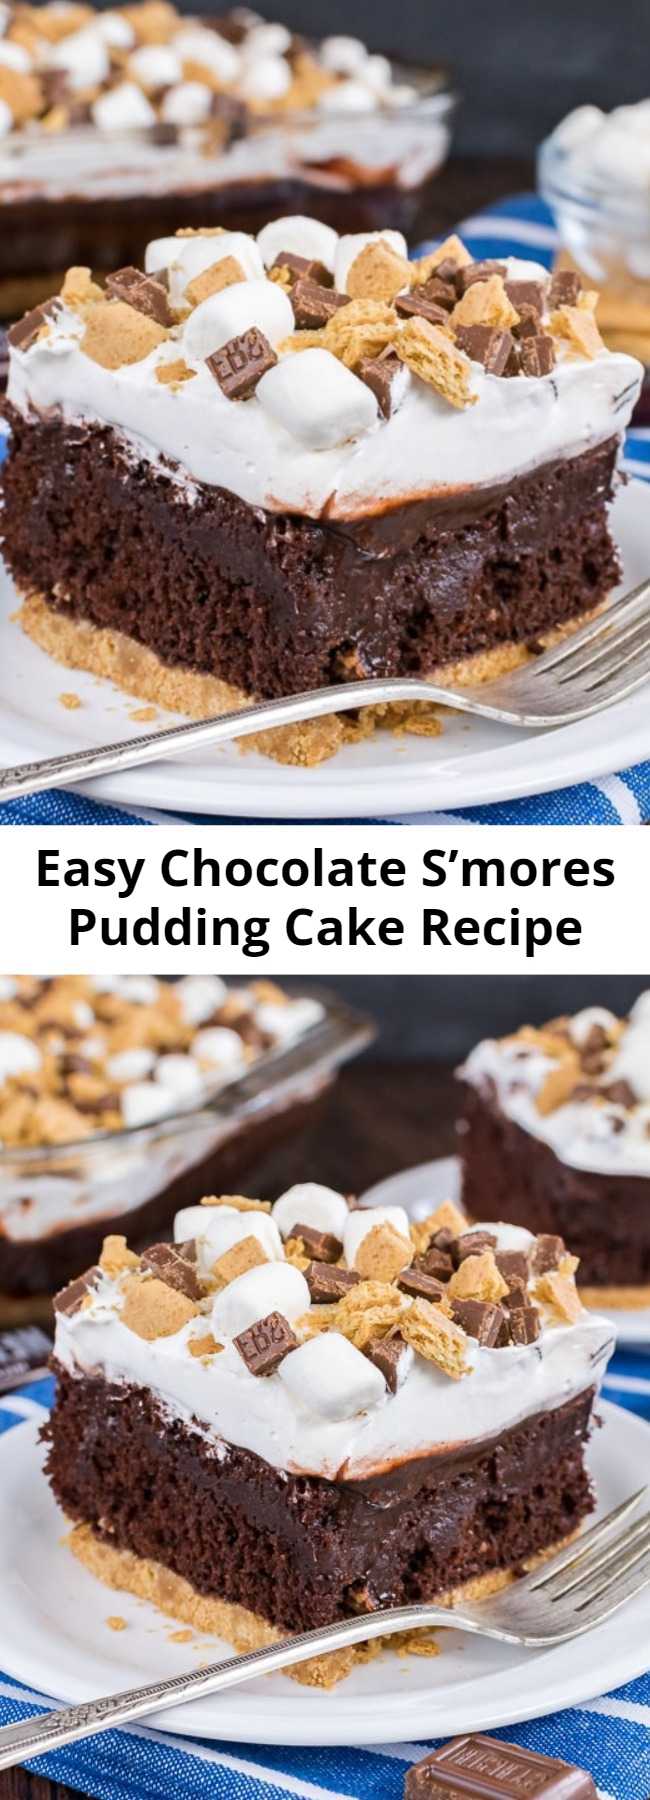 Easy Chocolate S’mores Pudding Cake Recipe - A graham cracker crust, chocolate pudding, and a marshmallow topping make this Chocolate S'mores Pudding Cake the perfect summer dessert.